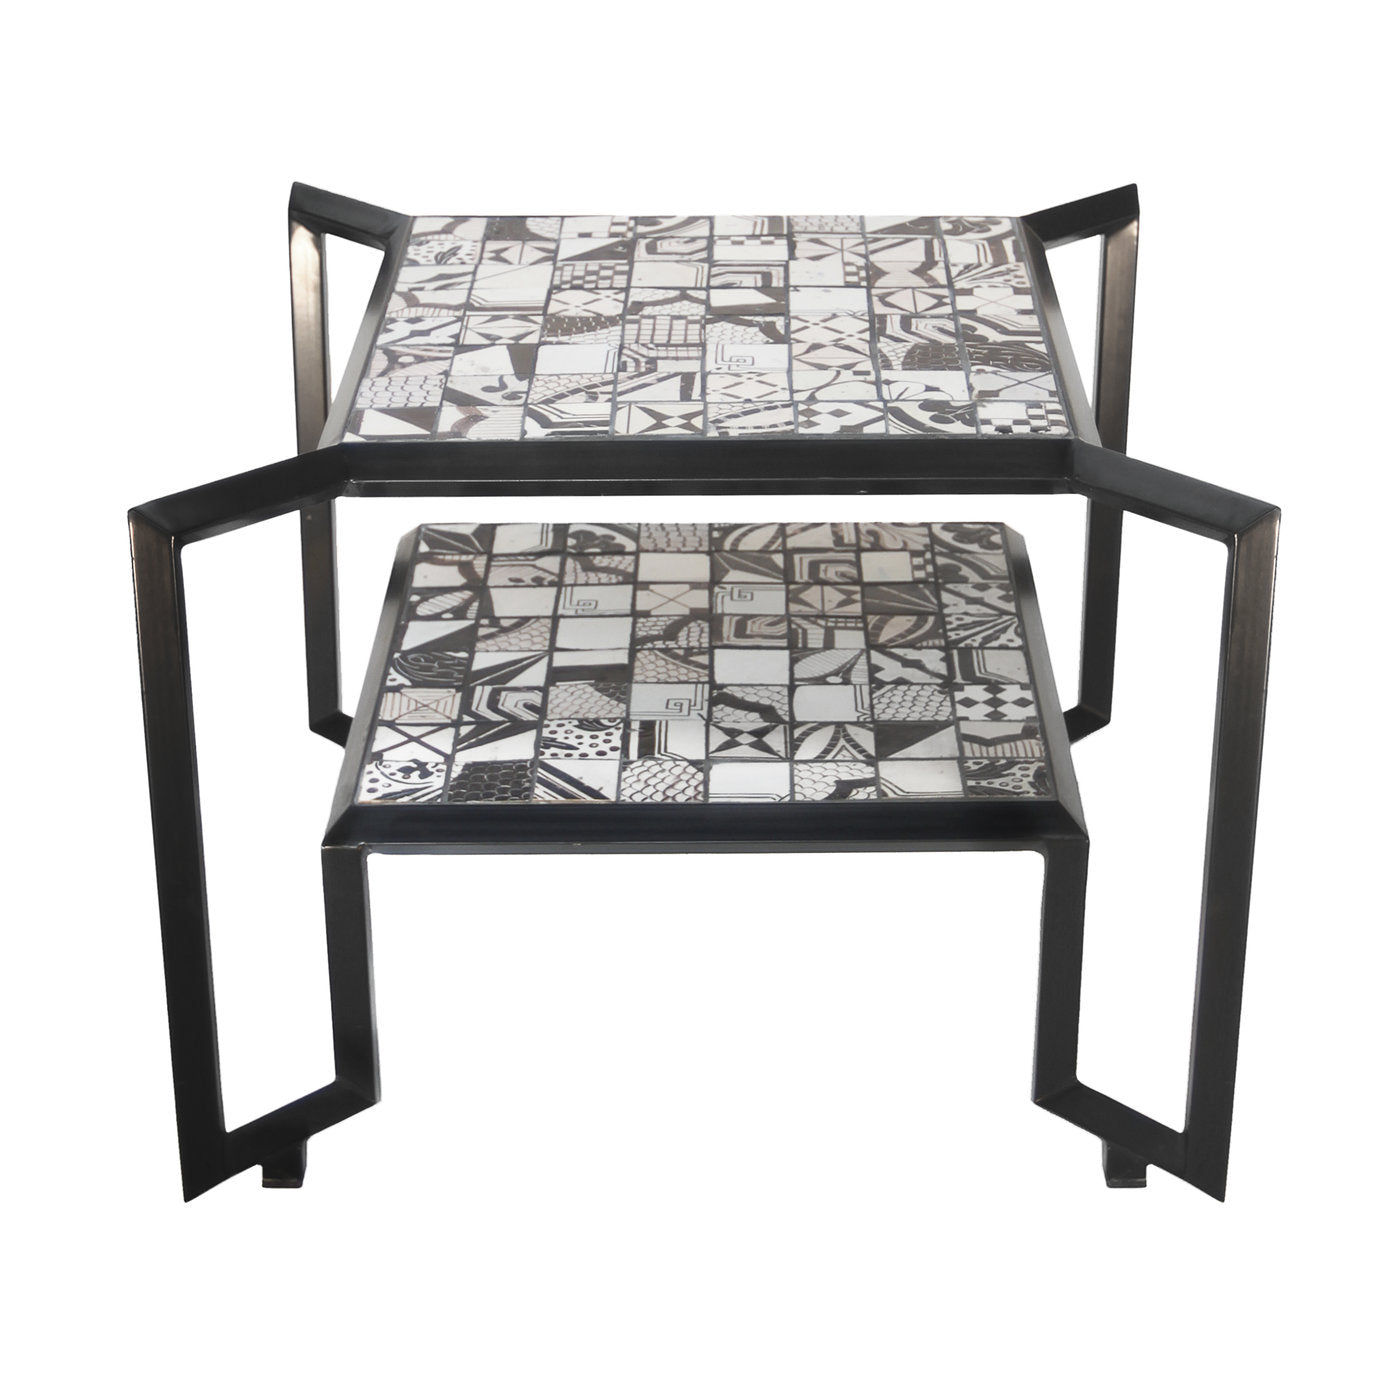 Black and White Spider Mosaic Tile Table - Alternative view 4